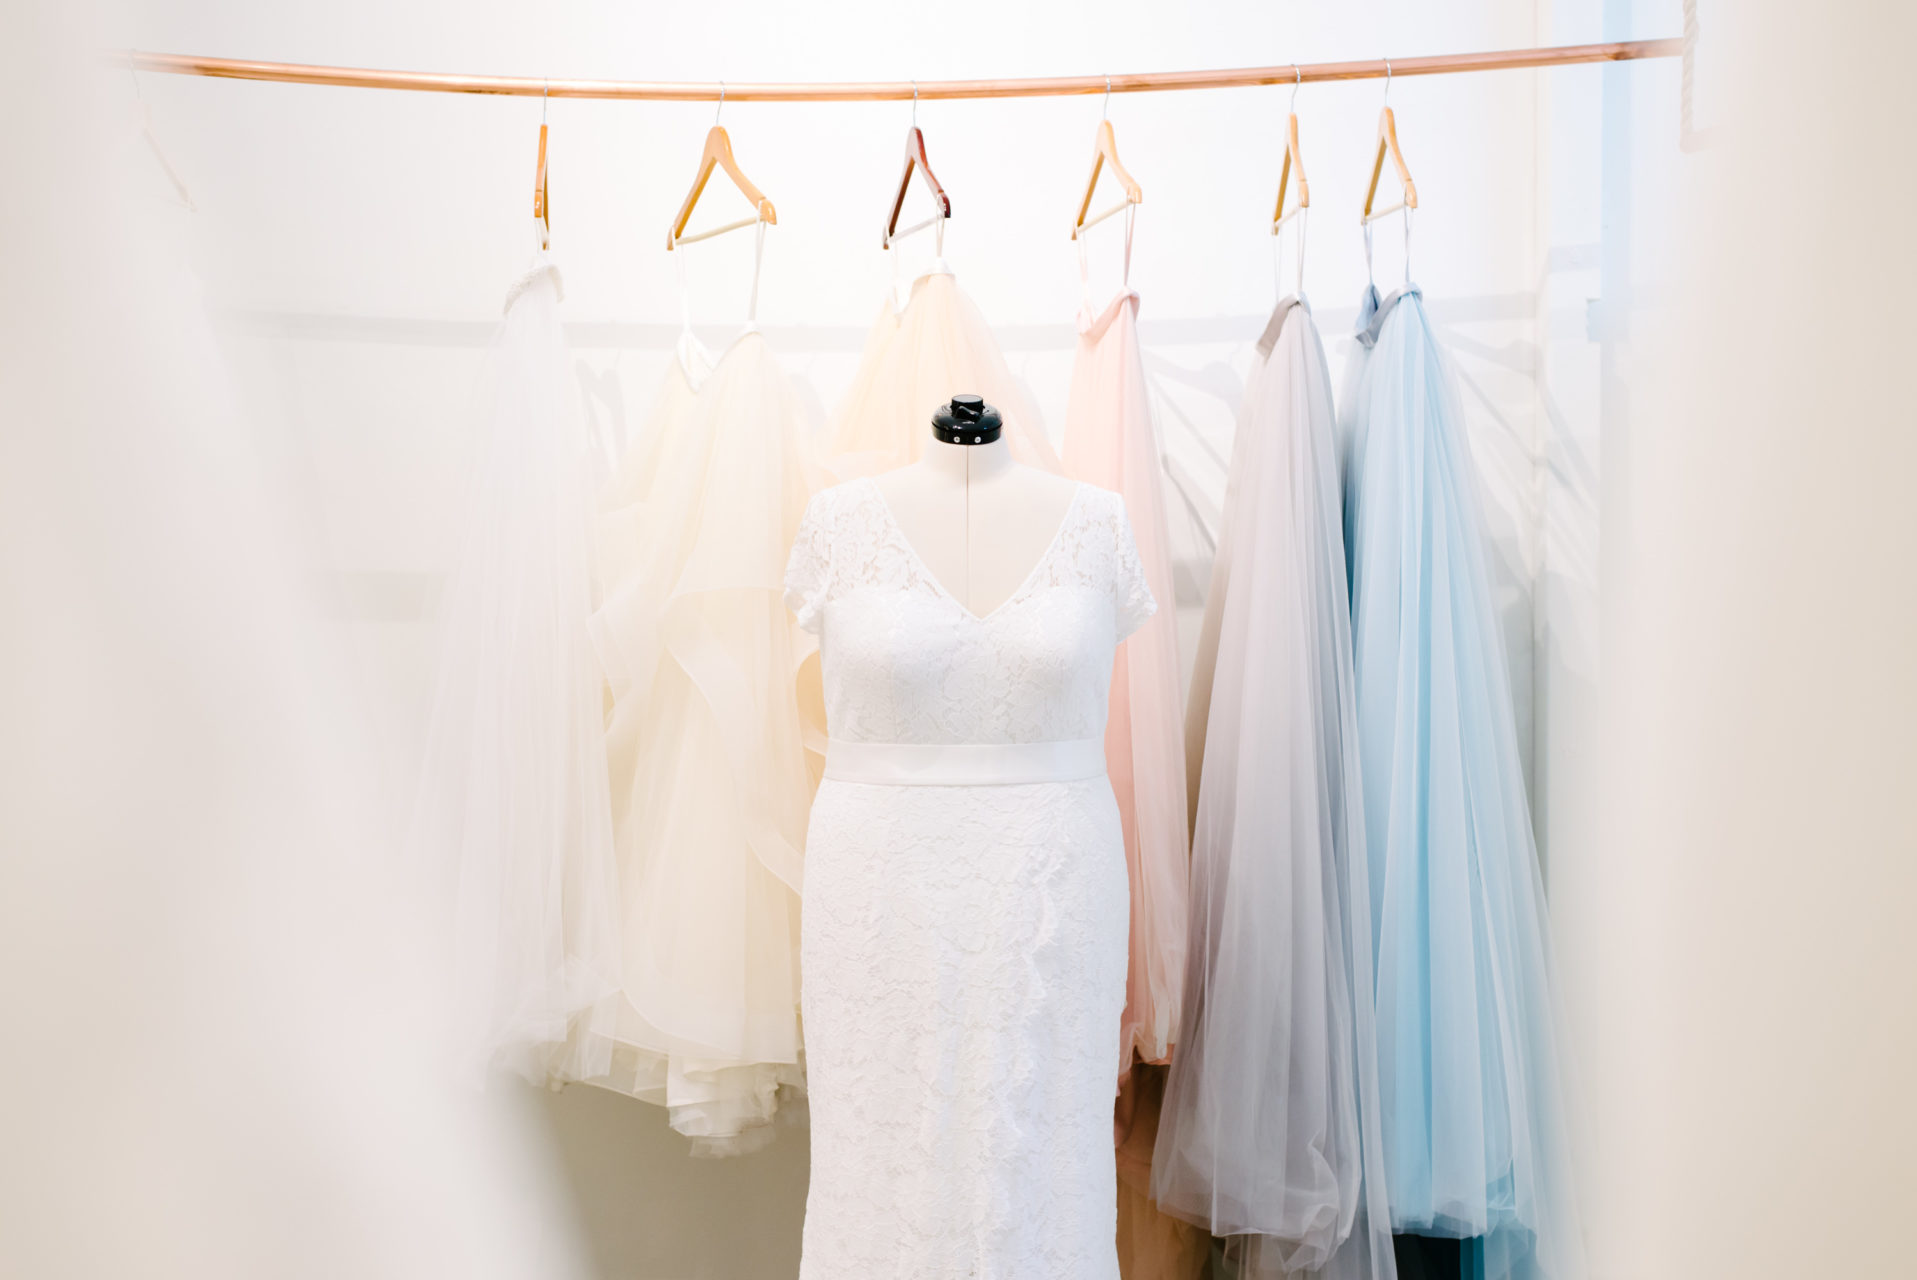 a selection of skirts hang behind a wedding dress on a form